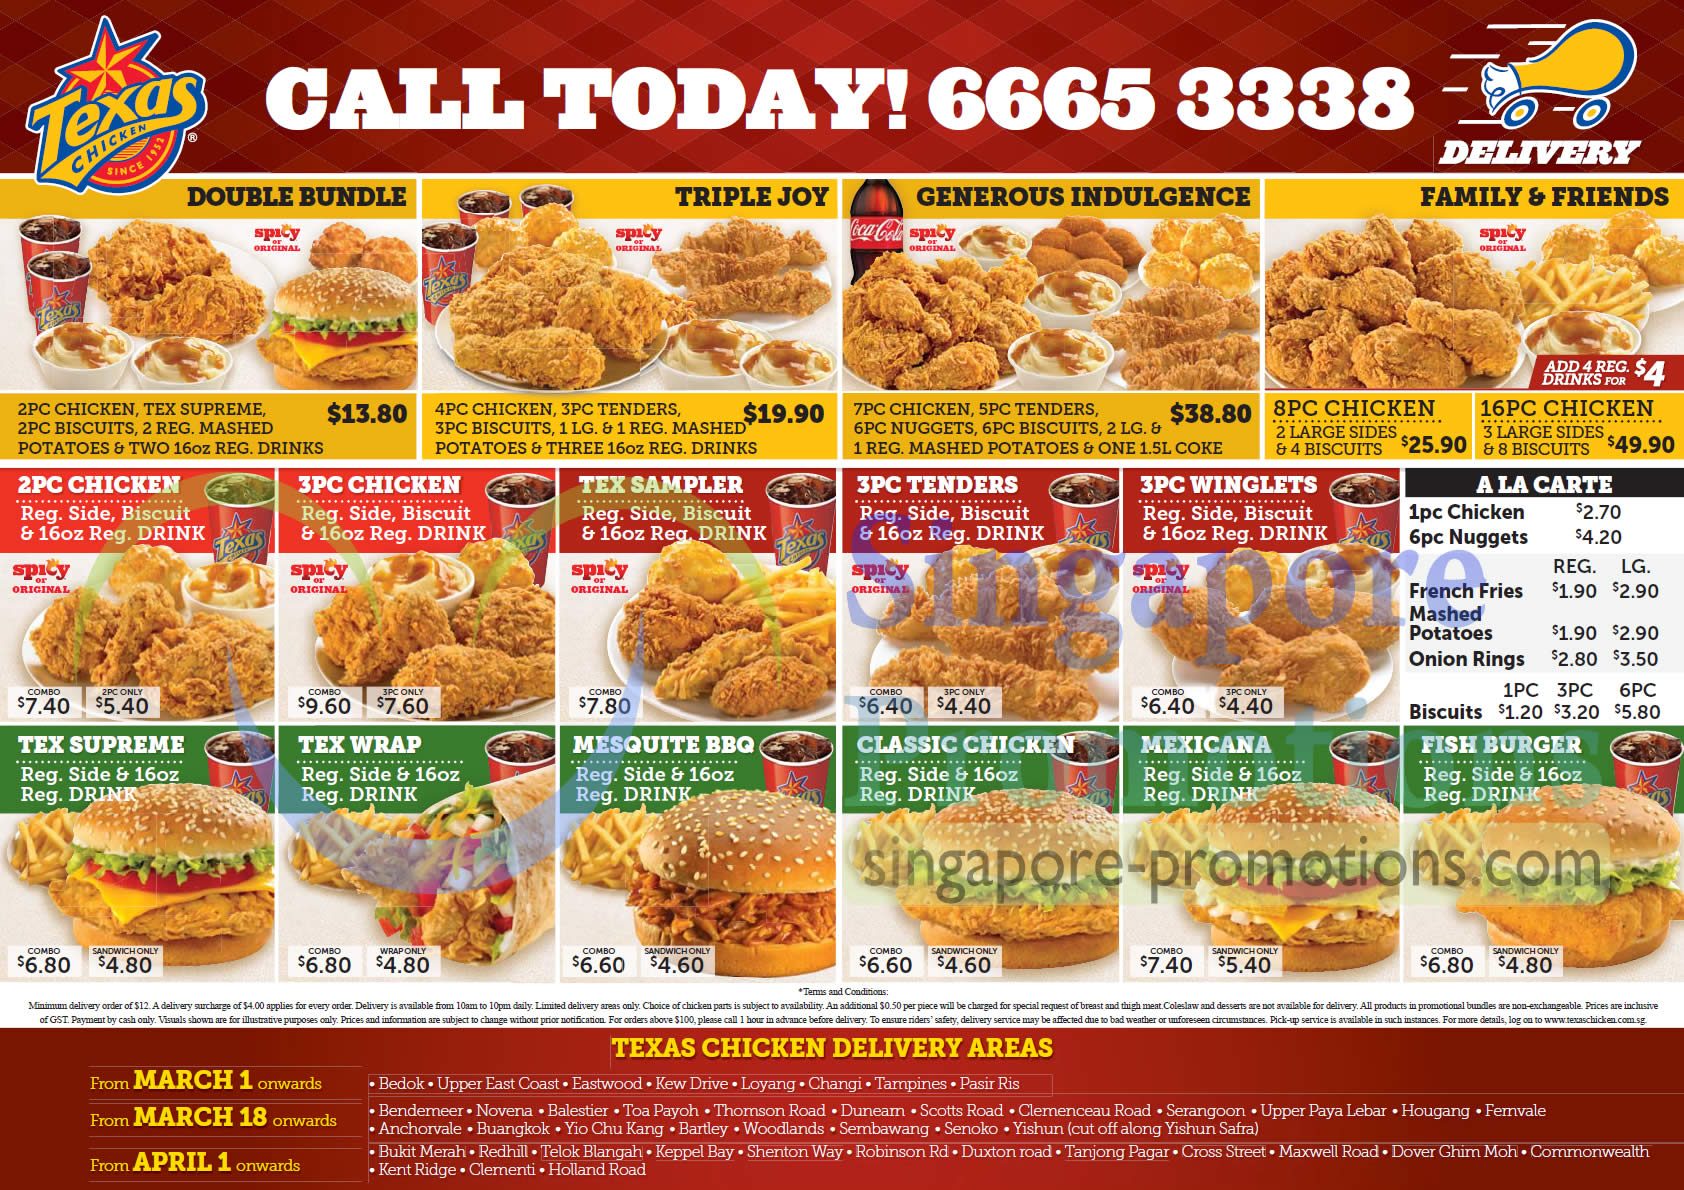 Texas Chicken Delivery Menu, Combo Deals, Delivery Areas, Phone Number » Texas Chicken FREE Home ...